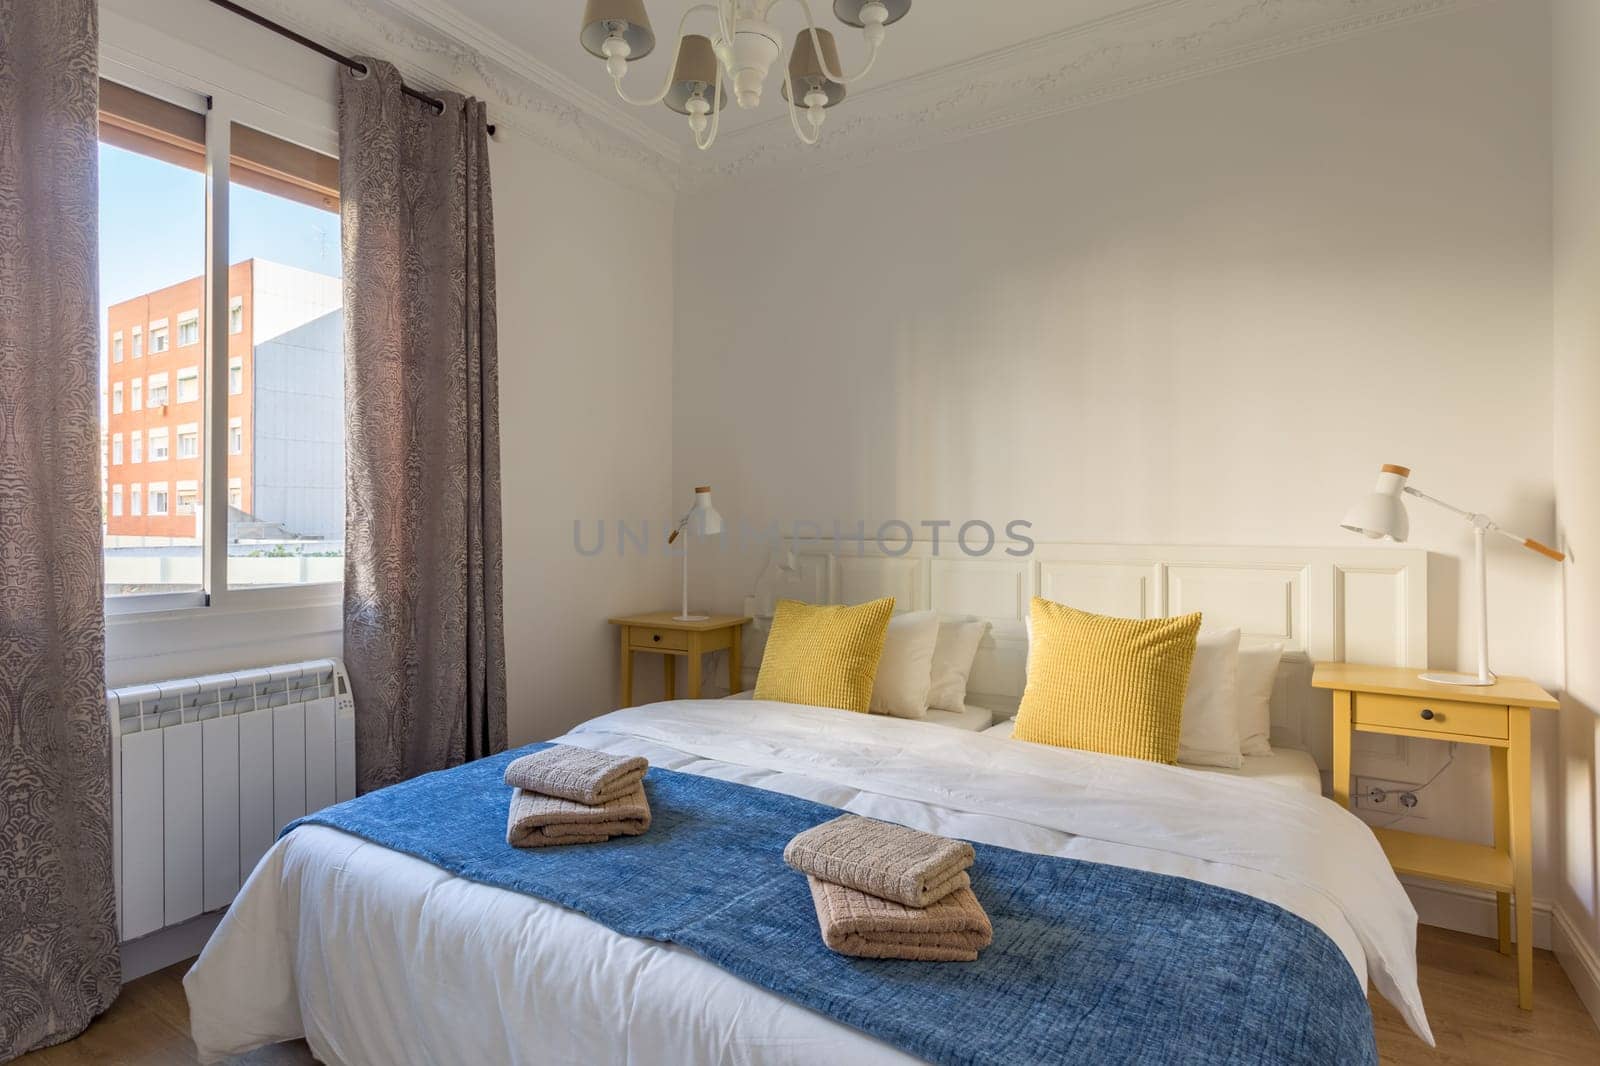 Interior of touristic bedroom with window. Yellow pillows on bed with towels. An apartment ready for booking by tourists by apavlin